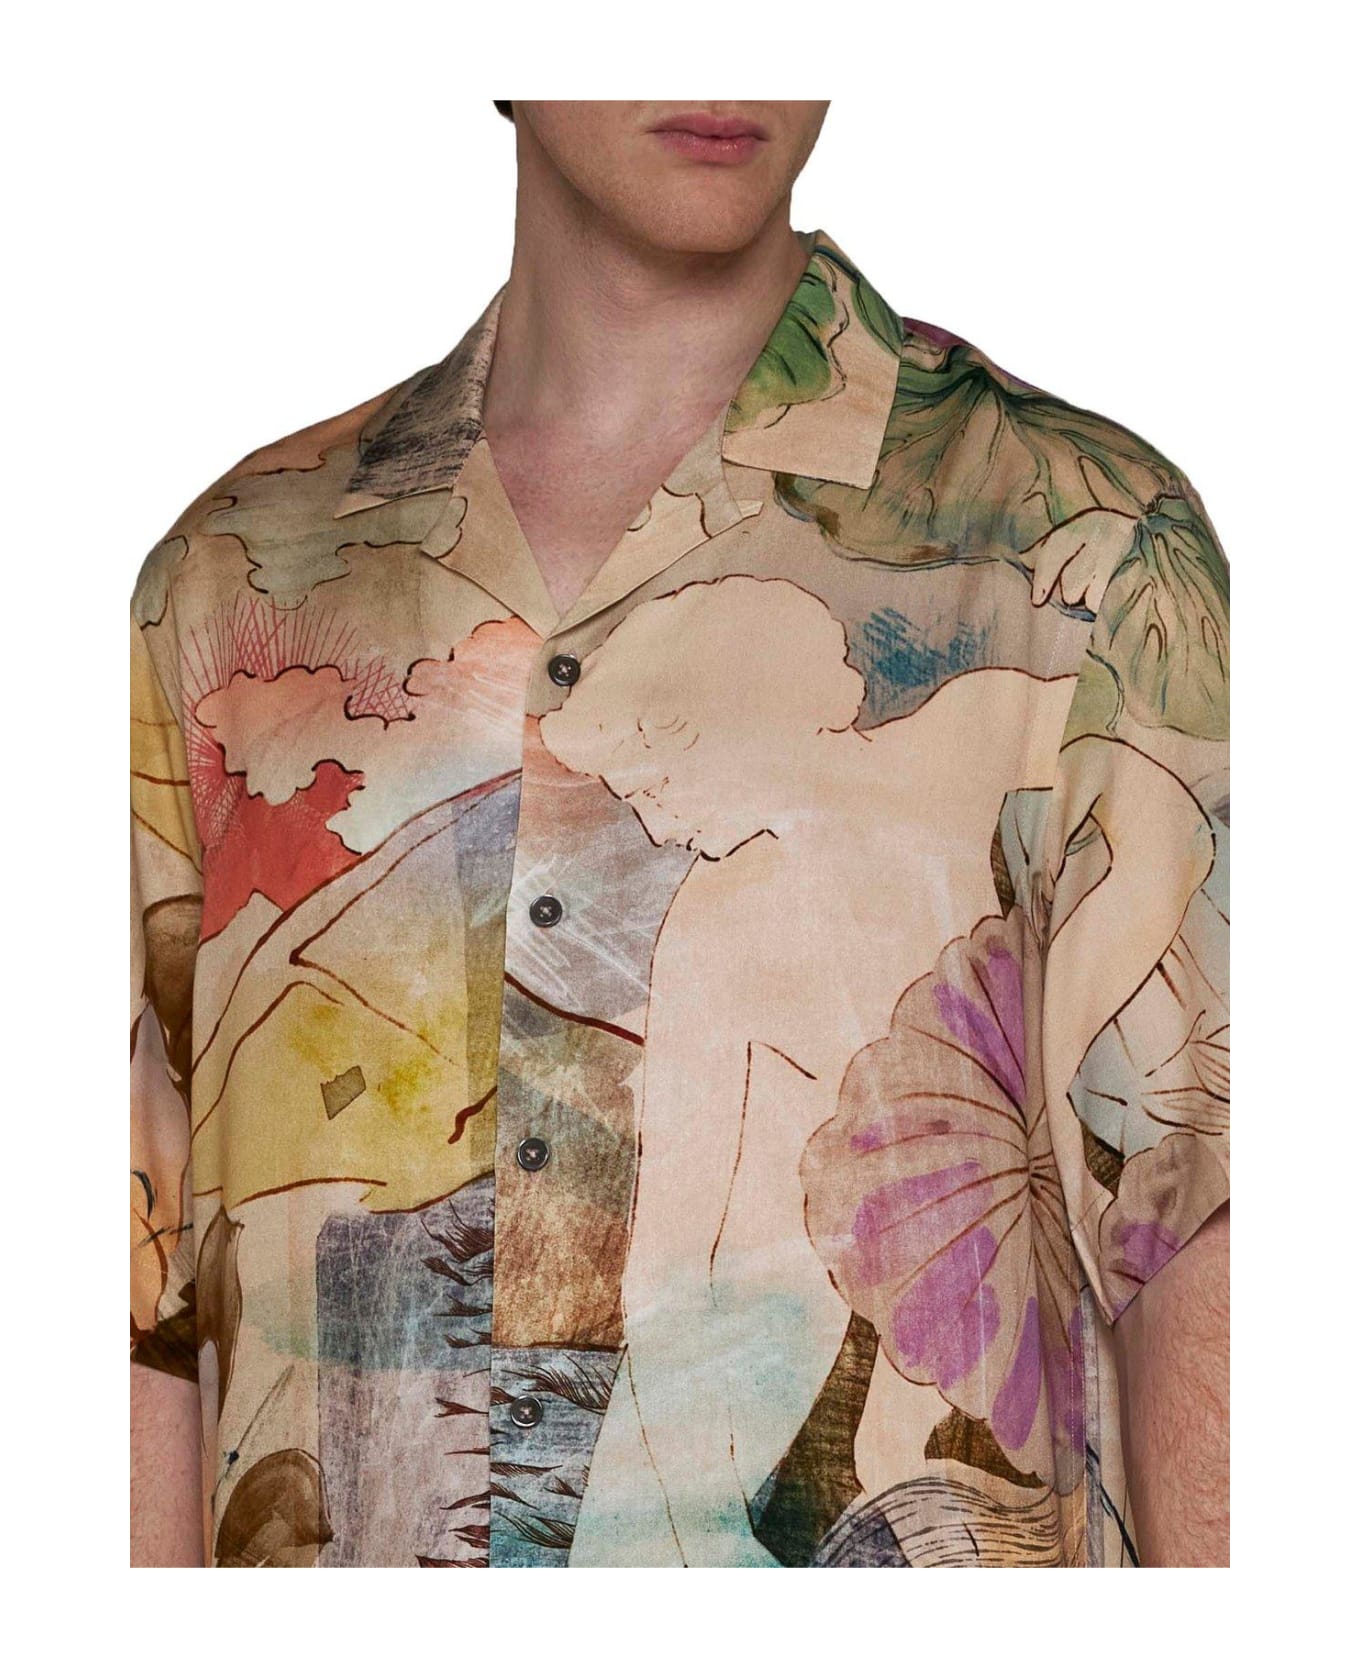 Paul Smith Graphic Printed Short-sleeved Shirt - BEIGE